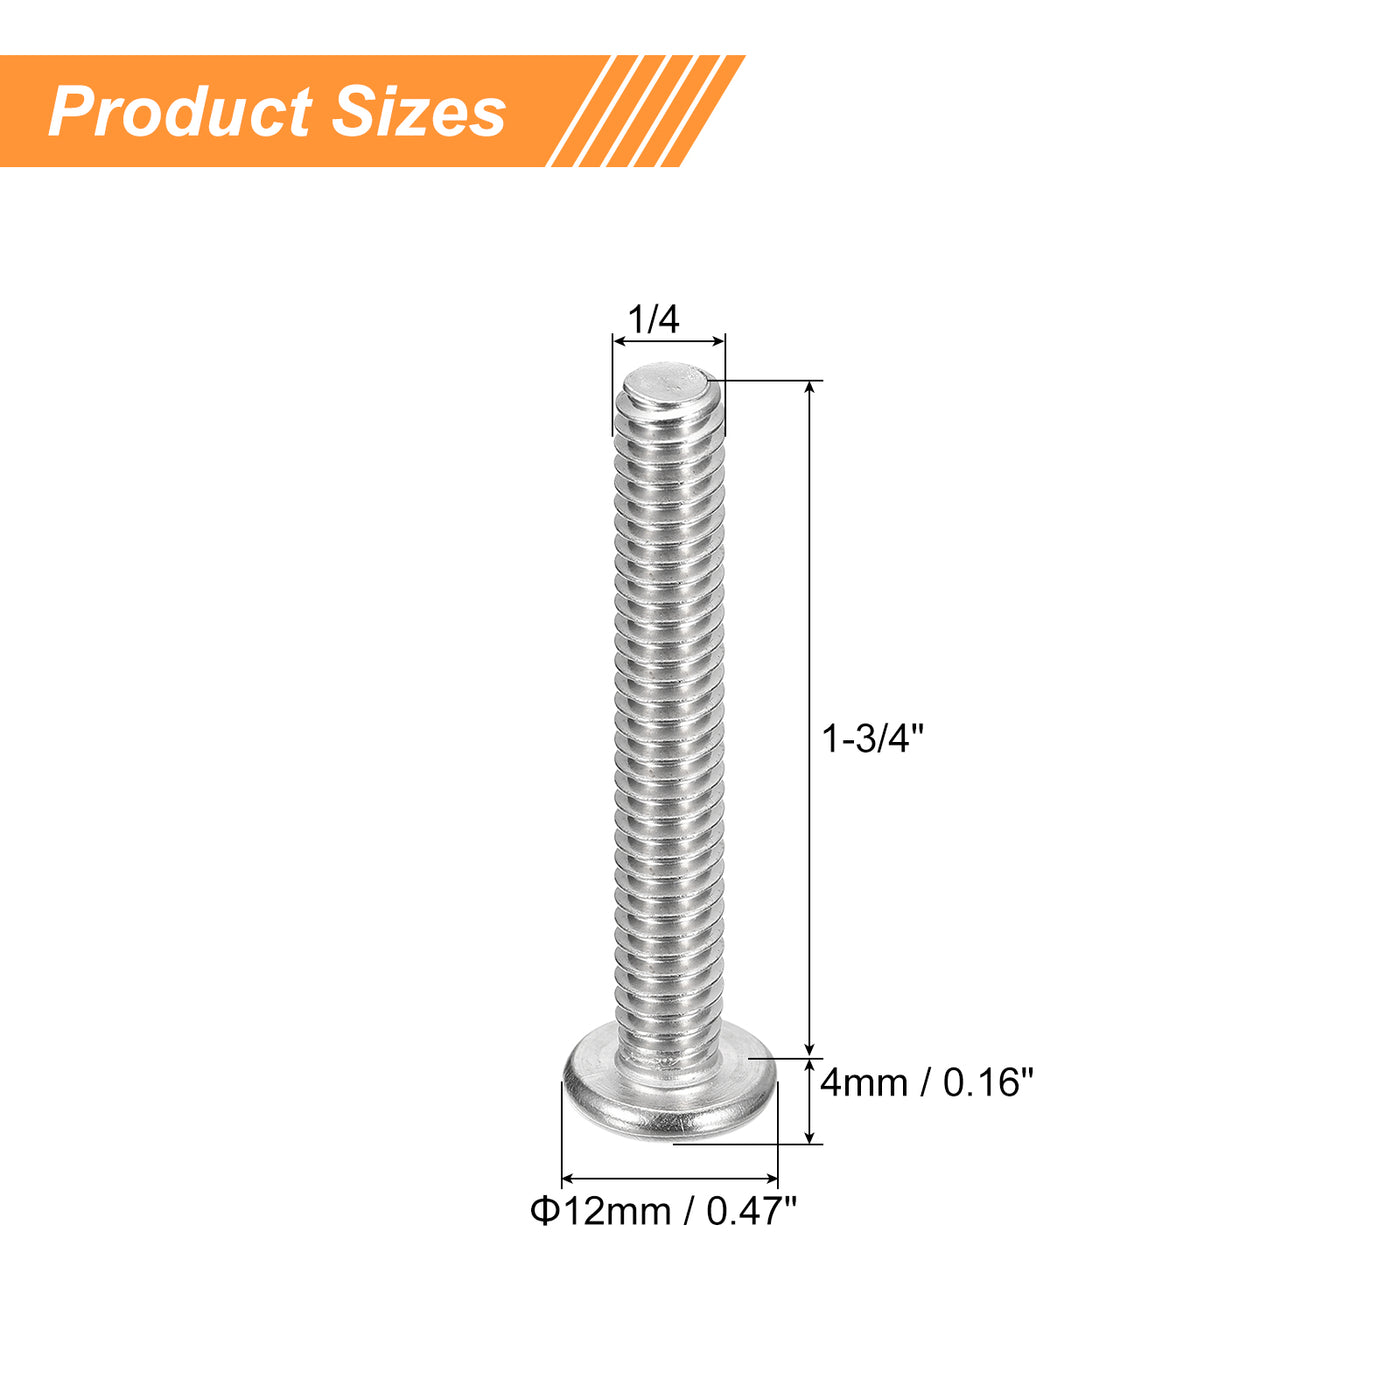 uxcell Uxcell 1/4-20x1-3/4" Pan Head Machine Screws, Stainless Steel 18-8 Screw, Pack of 20